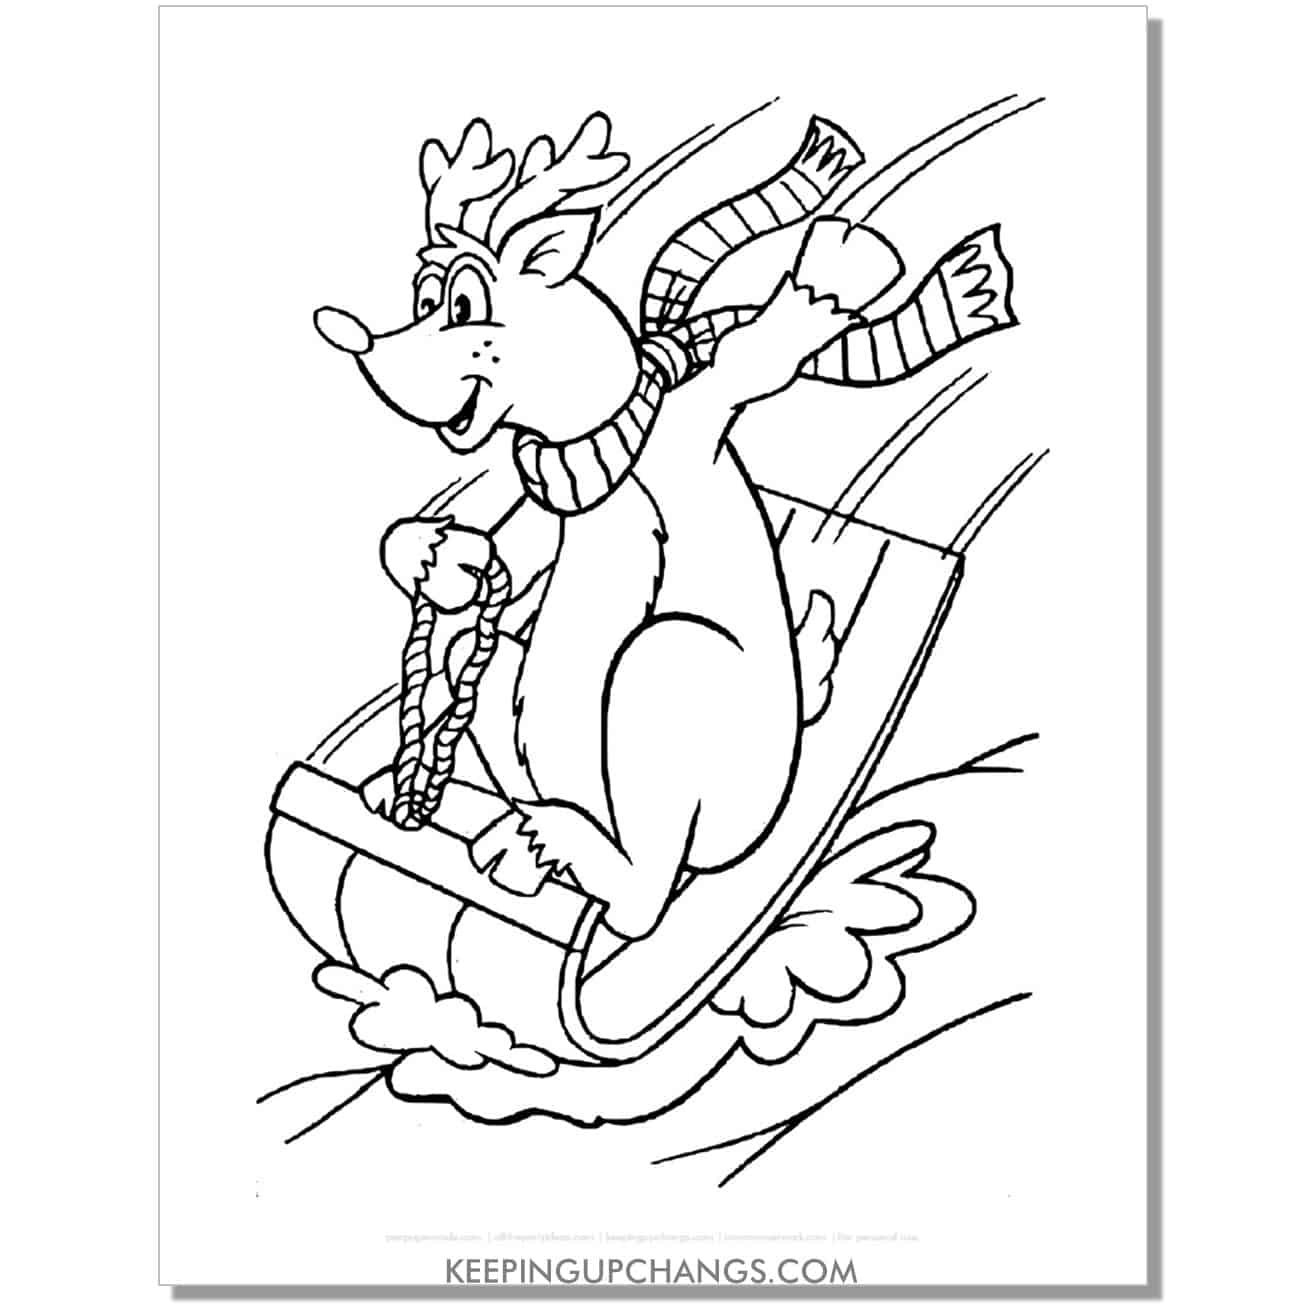 free reindeer riding on sled coloring page.